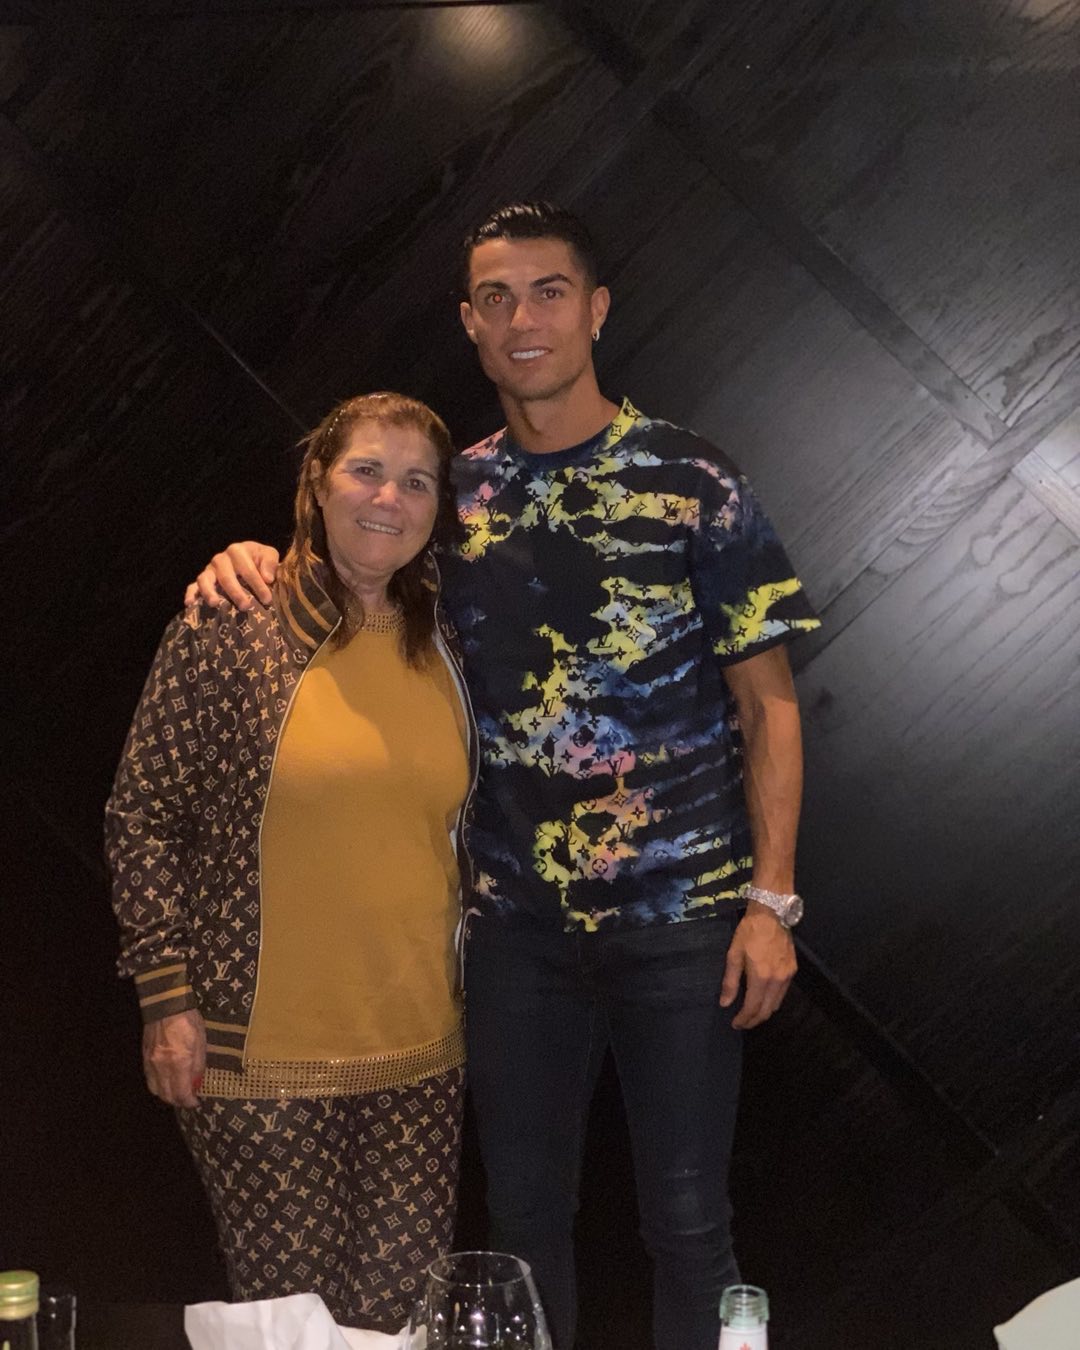 Ronaldo and his mother